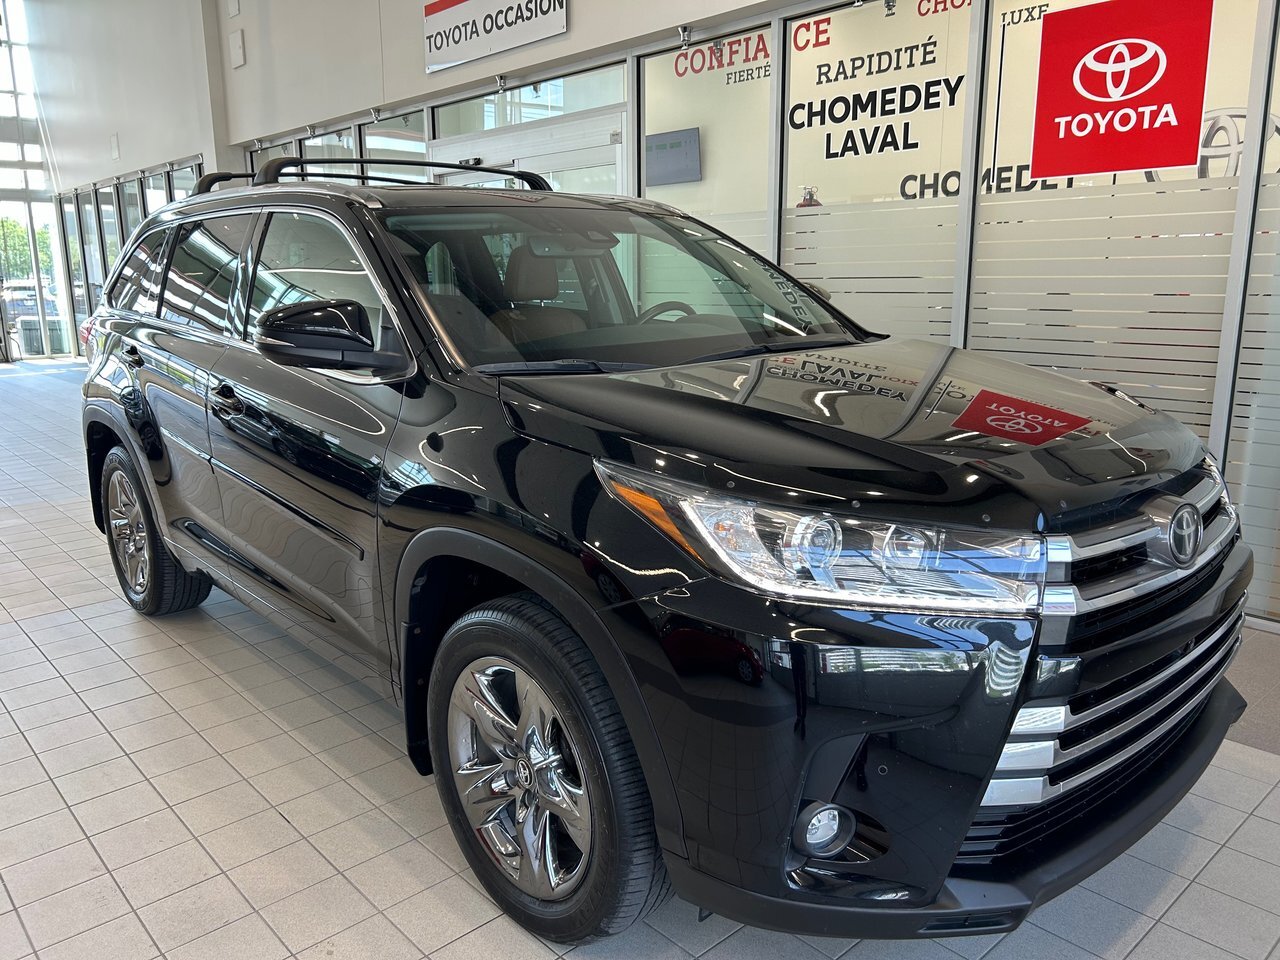 2019 Toyota Highlander Hybrid Limited AWD 7 Places Toit Pano Cuir GPS Cam